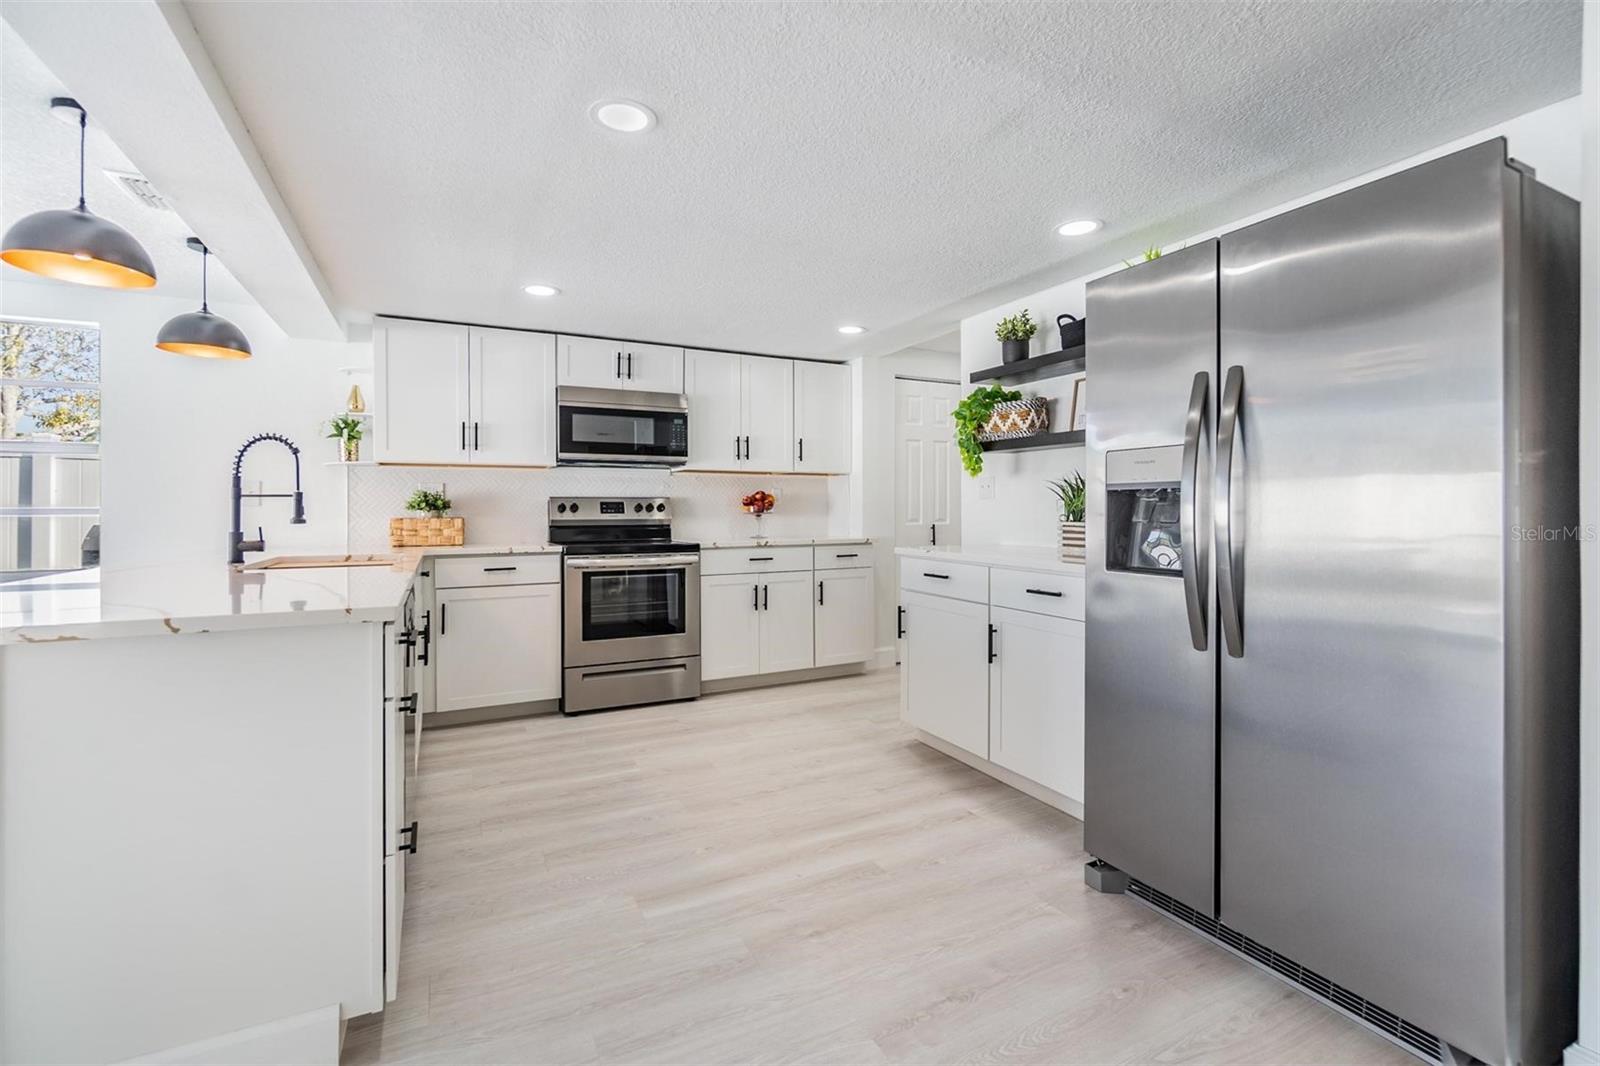 All new renovated kitchen. Luxury vinyl plank flooring, commercial faucet, gourmet sink, quartz countertops, shaker cabinets, stylish shelving, new hardware, can lights and pendulum lights above 10-feet bar.